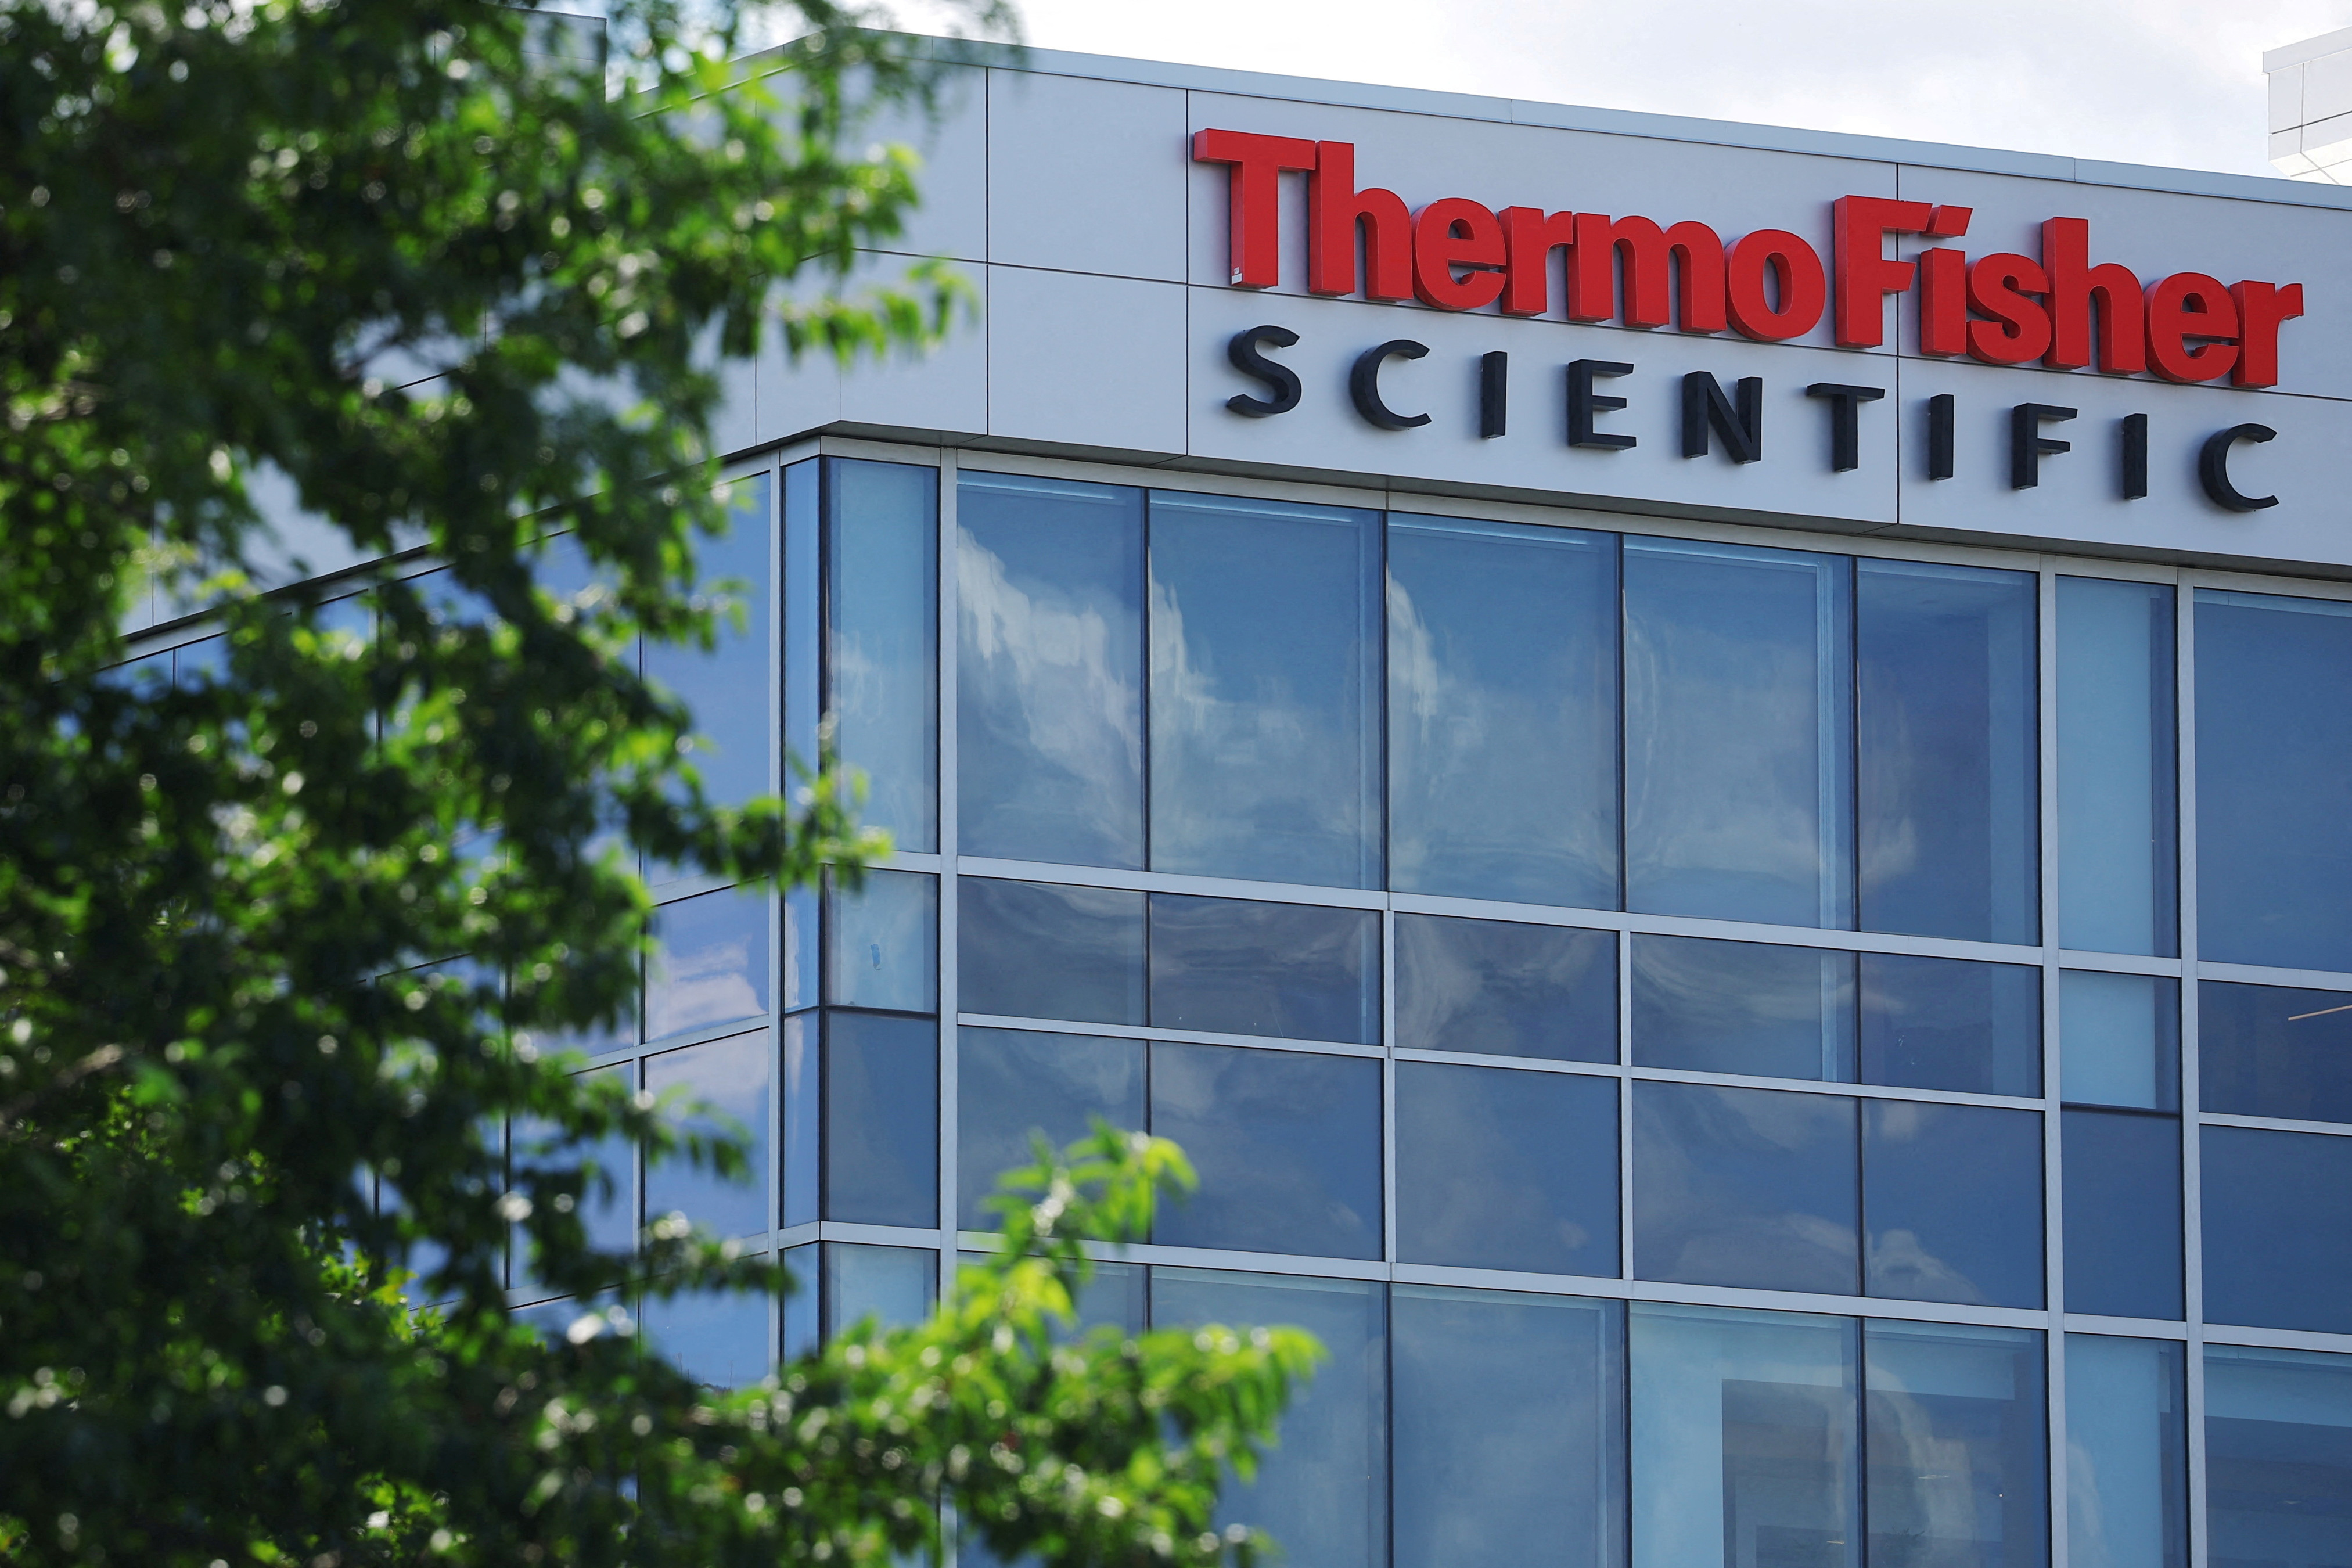 The offices of Thermo Fisher Scientific stand in Waltham